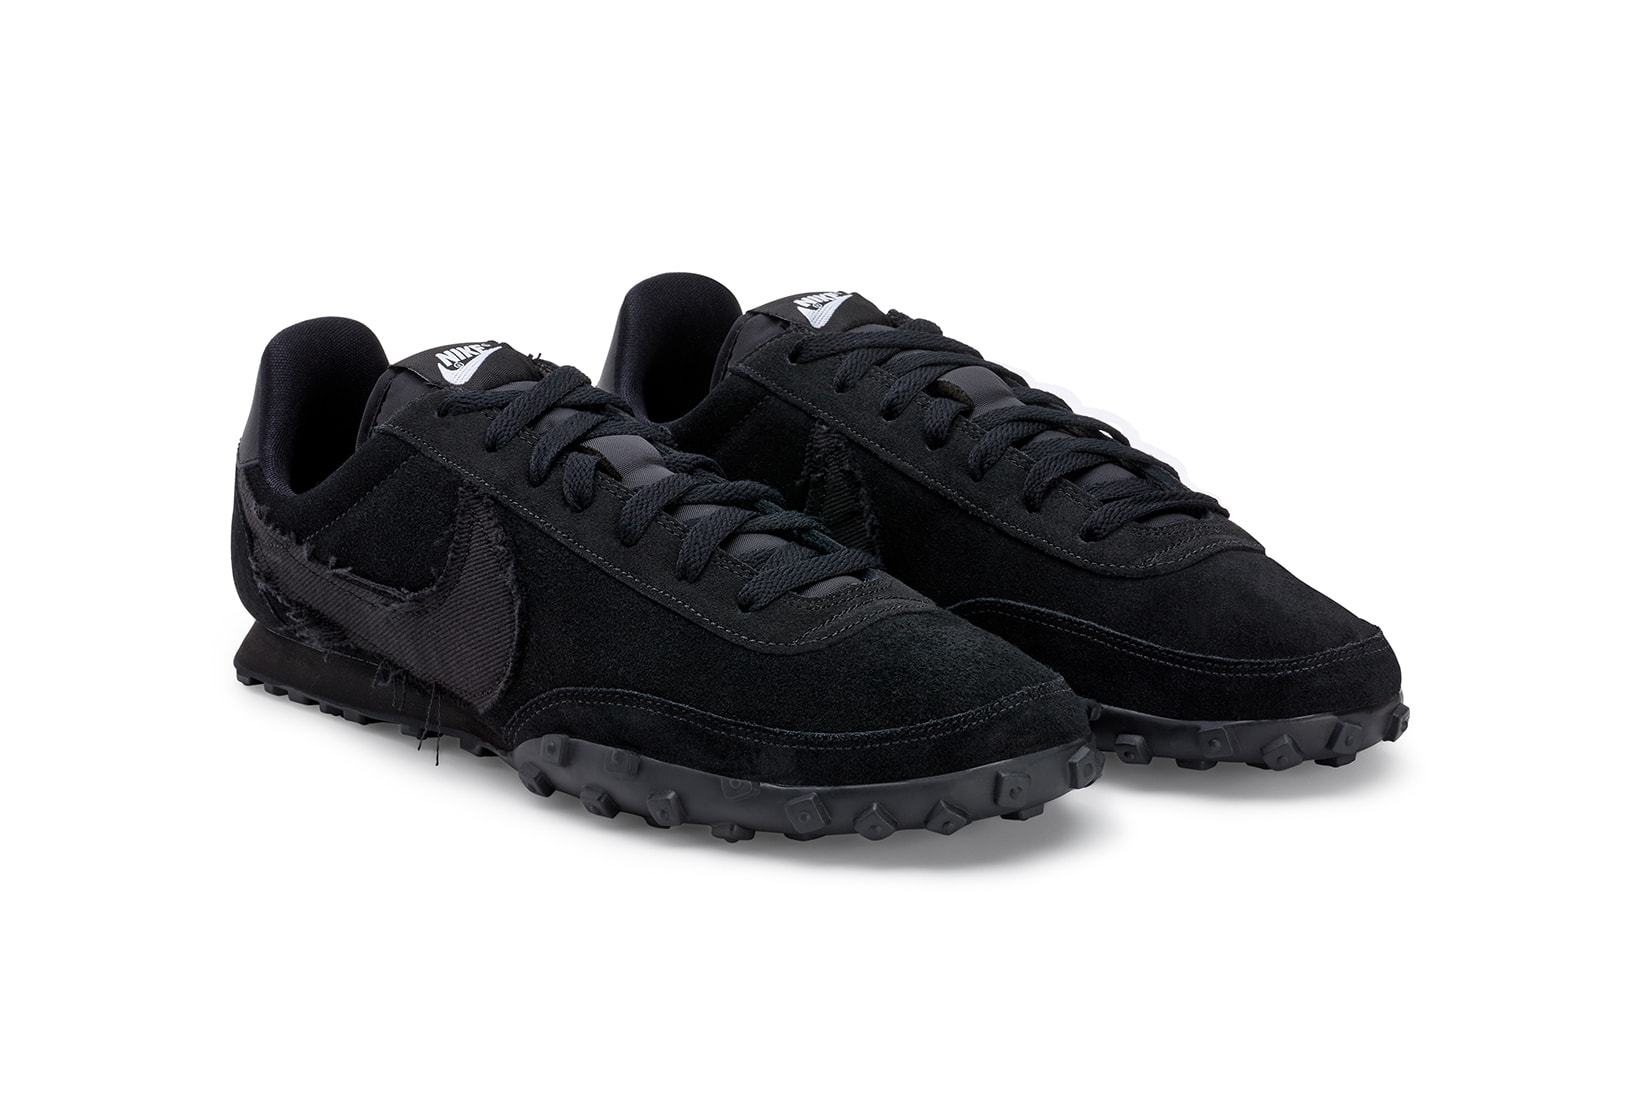 comme des garcons nike waffle racer 2 black release info price collaboration 